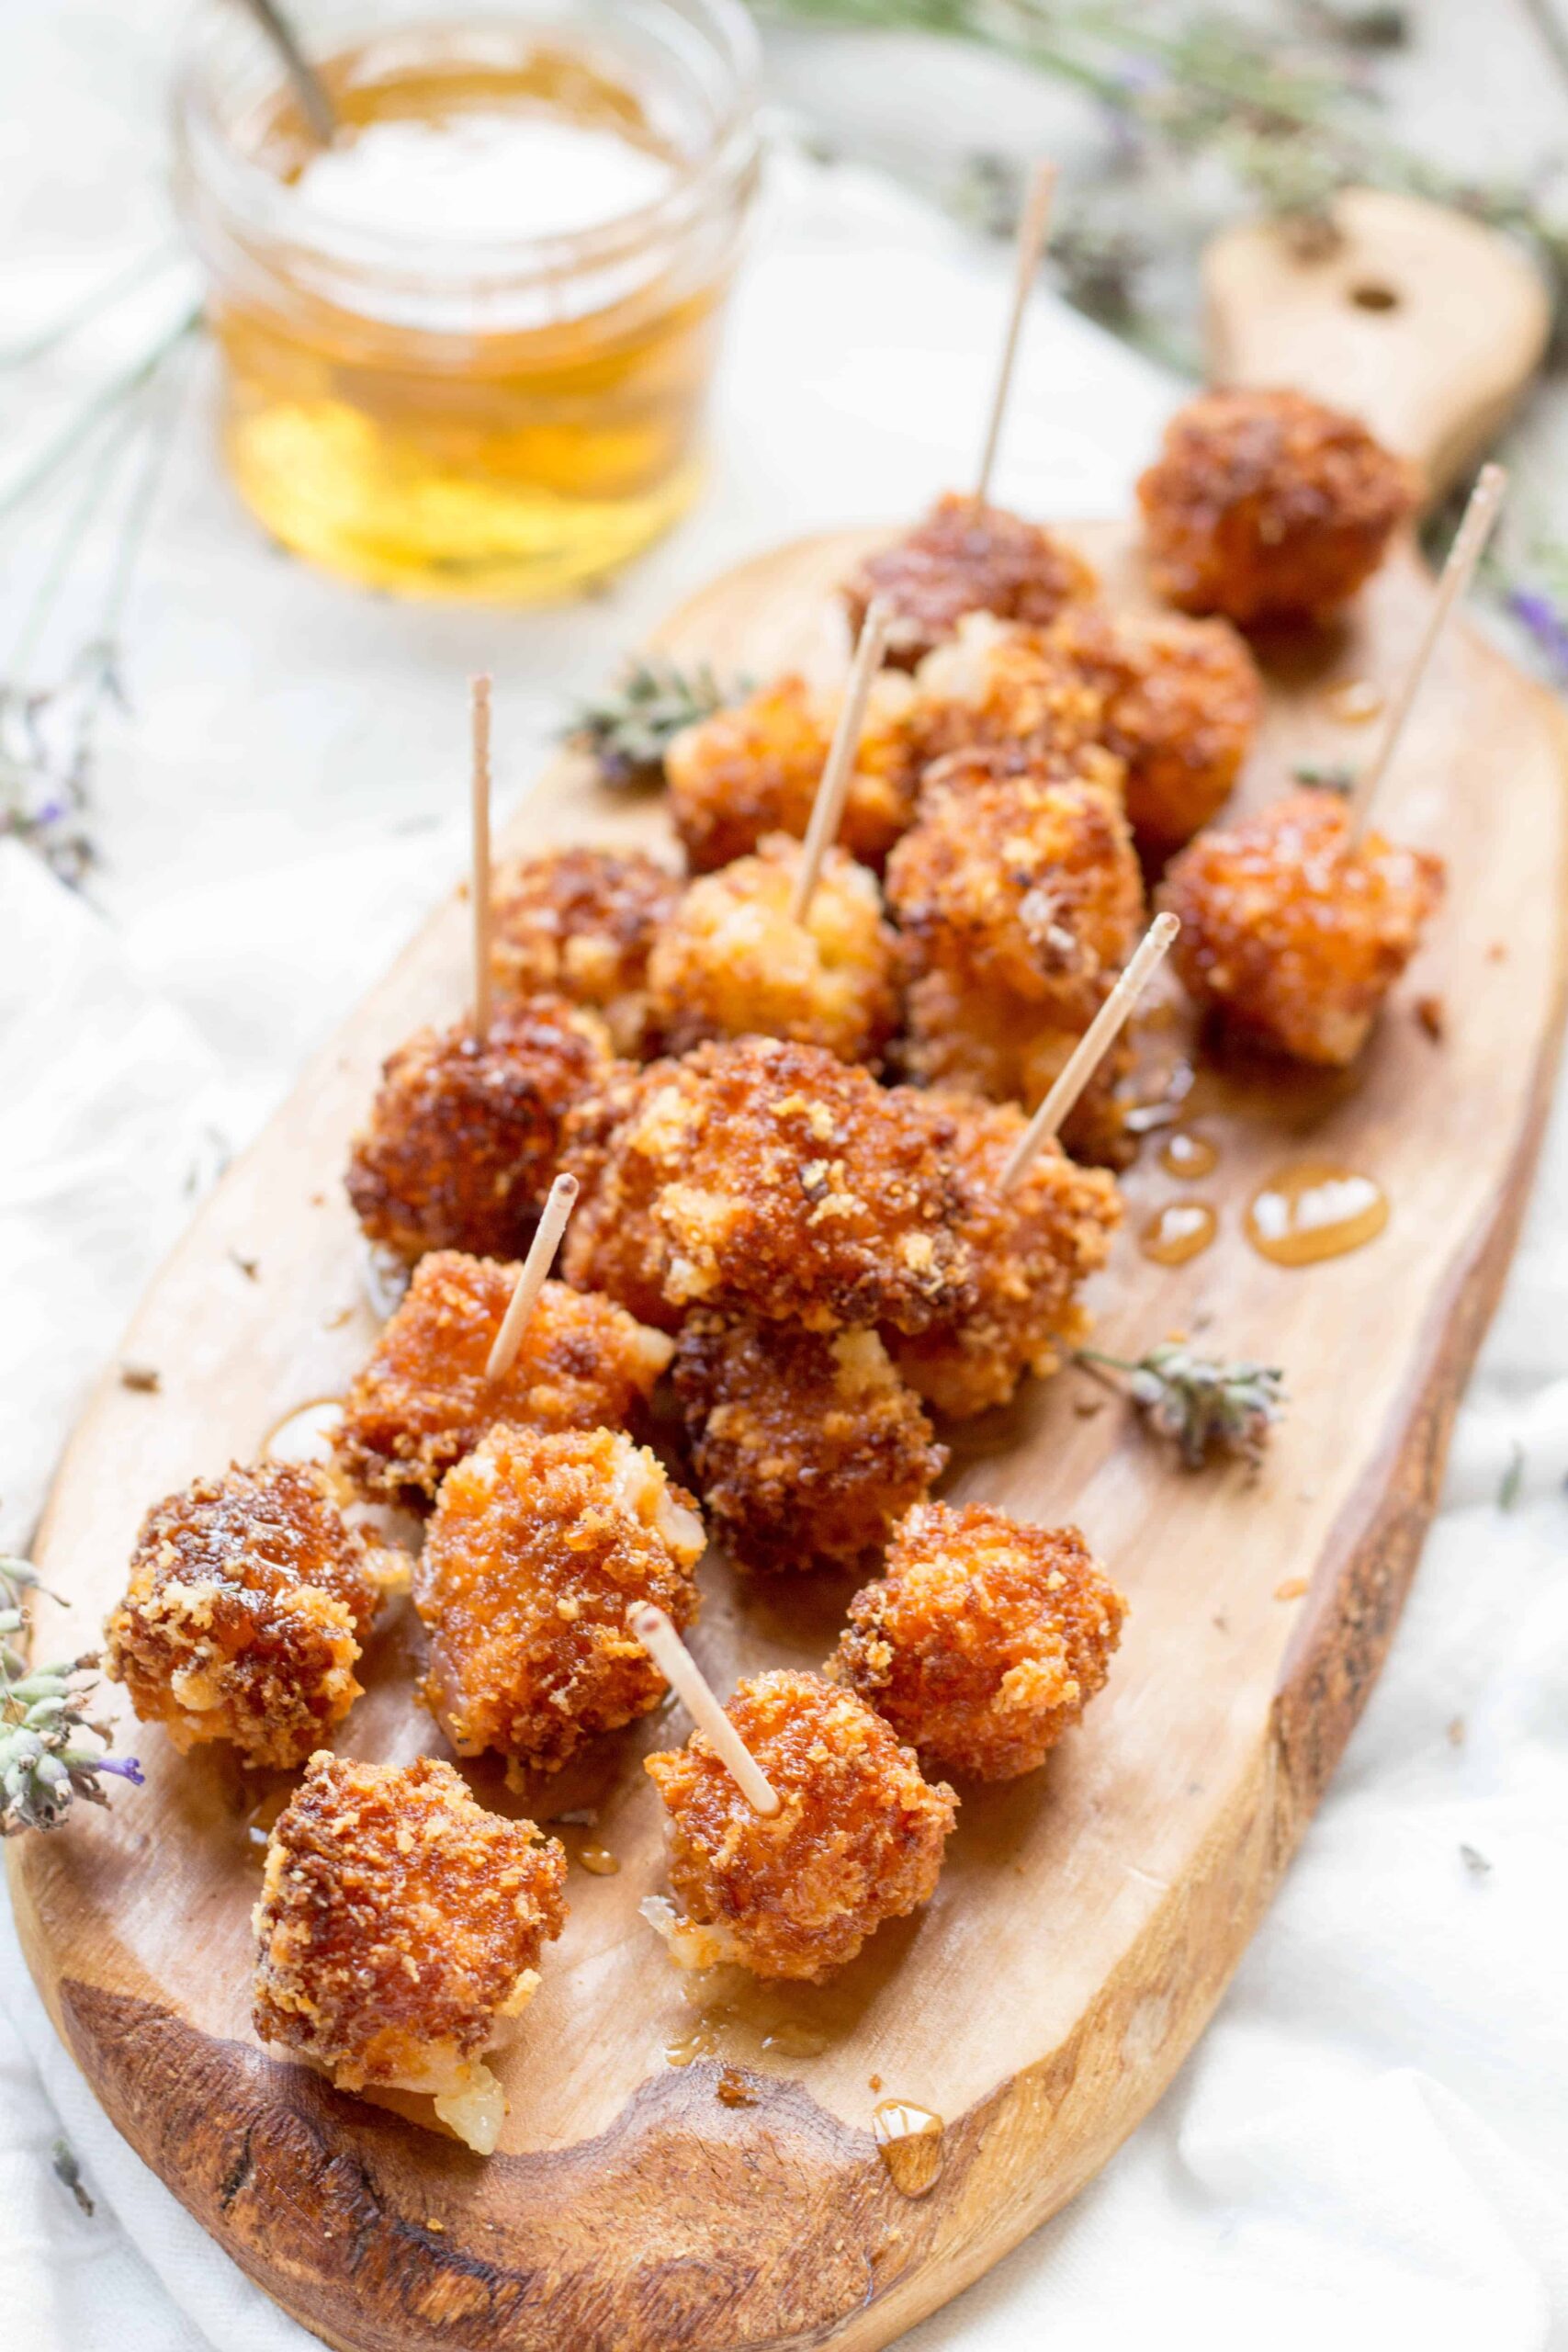 Fried Manchego Cheese with Lavender Honey (Video!)